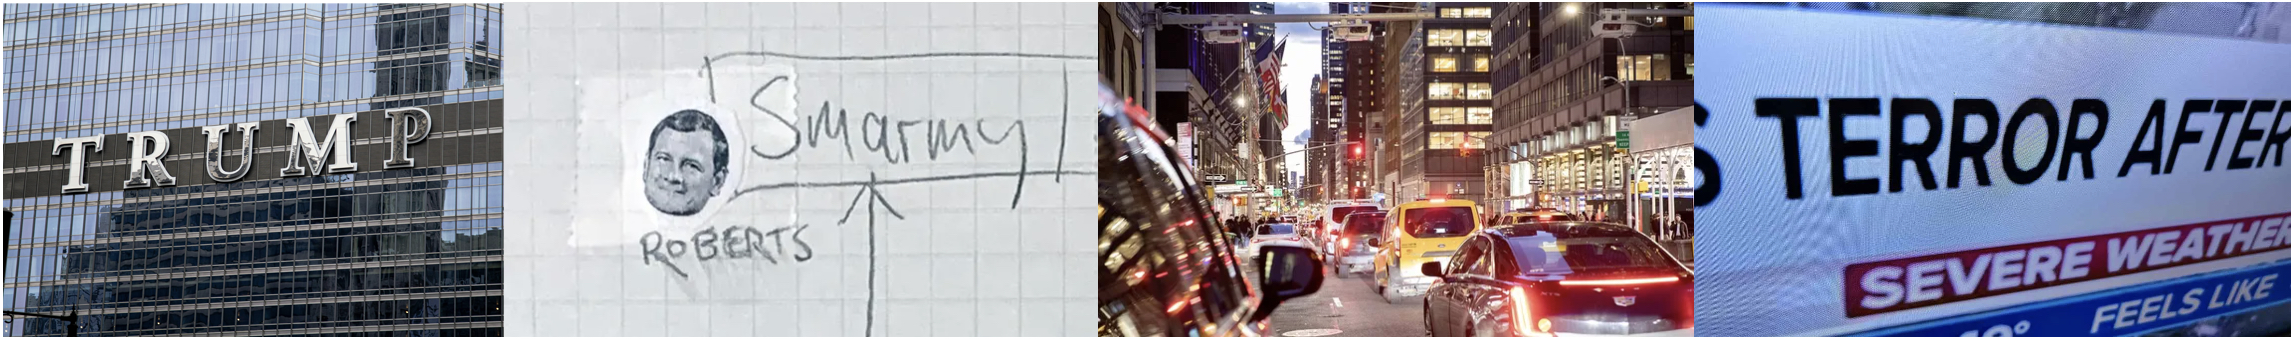 Images from Monday-Thursday posts, L-R: TRUMP lettering on a skyscraper, a section of the X/Y graphic with John Roberts' head near SMARMY, traffic in NYC, the word TERROR from a TV weather graphic